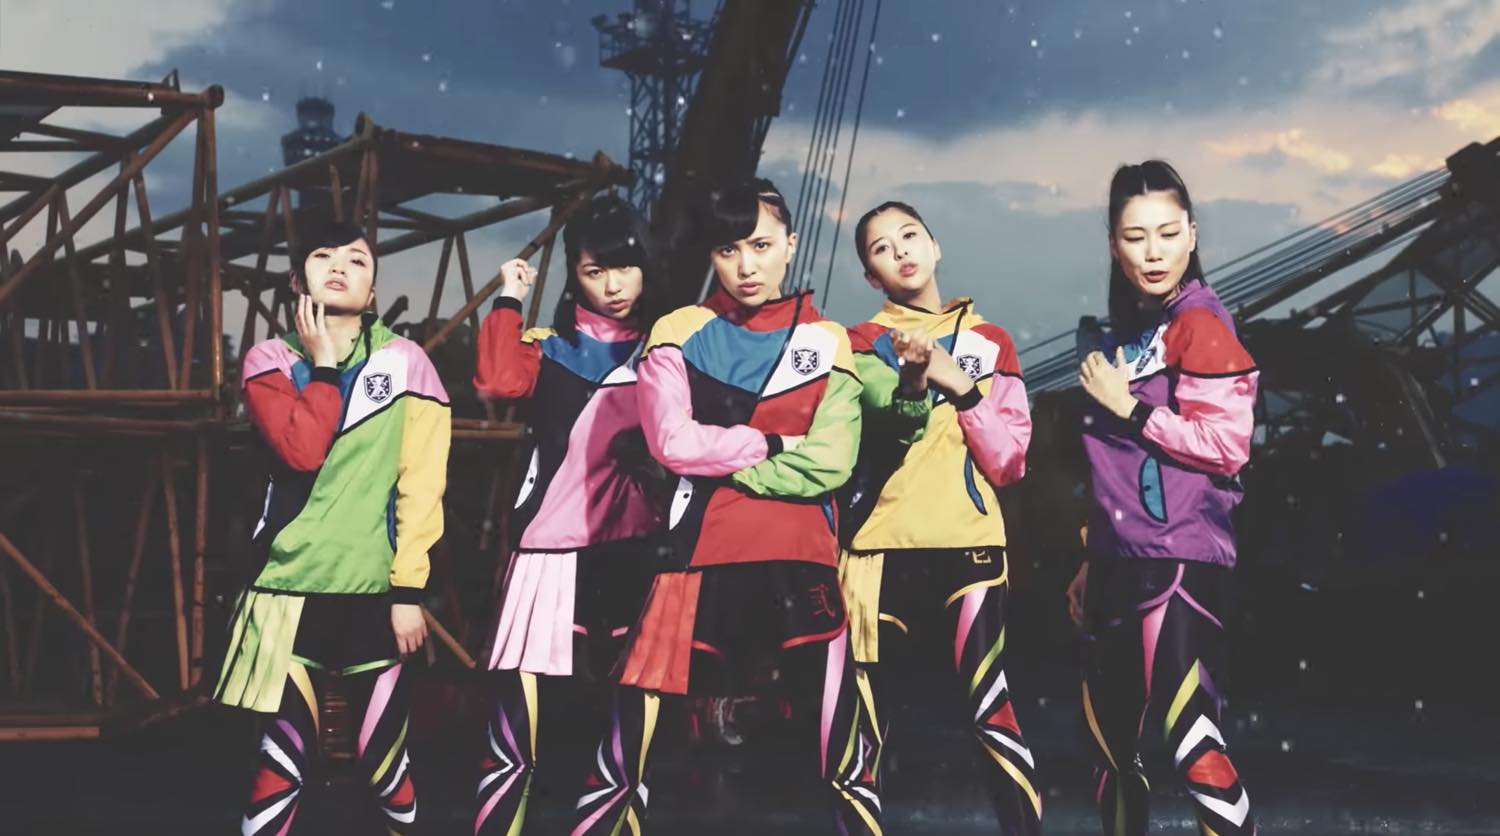 Momoiro Clover Z Chill Out in the Cool MV for “Kyōkai no Pendulum”!